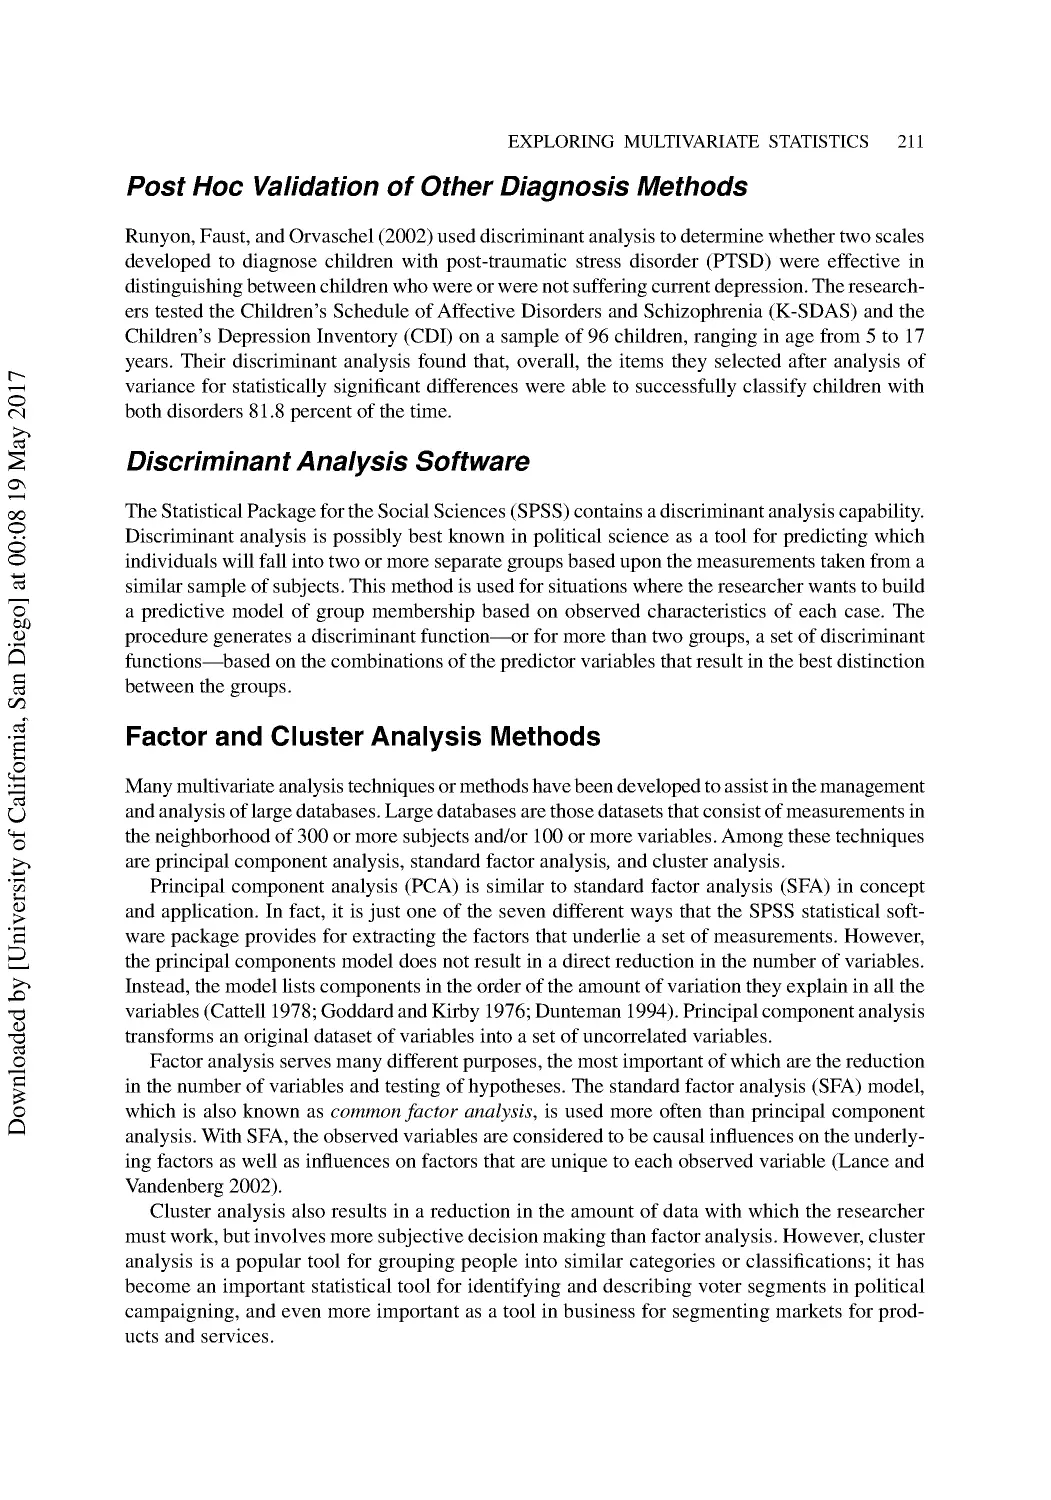 Factor and Cluster Analysis Methods